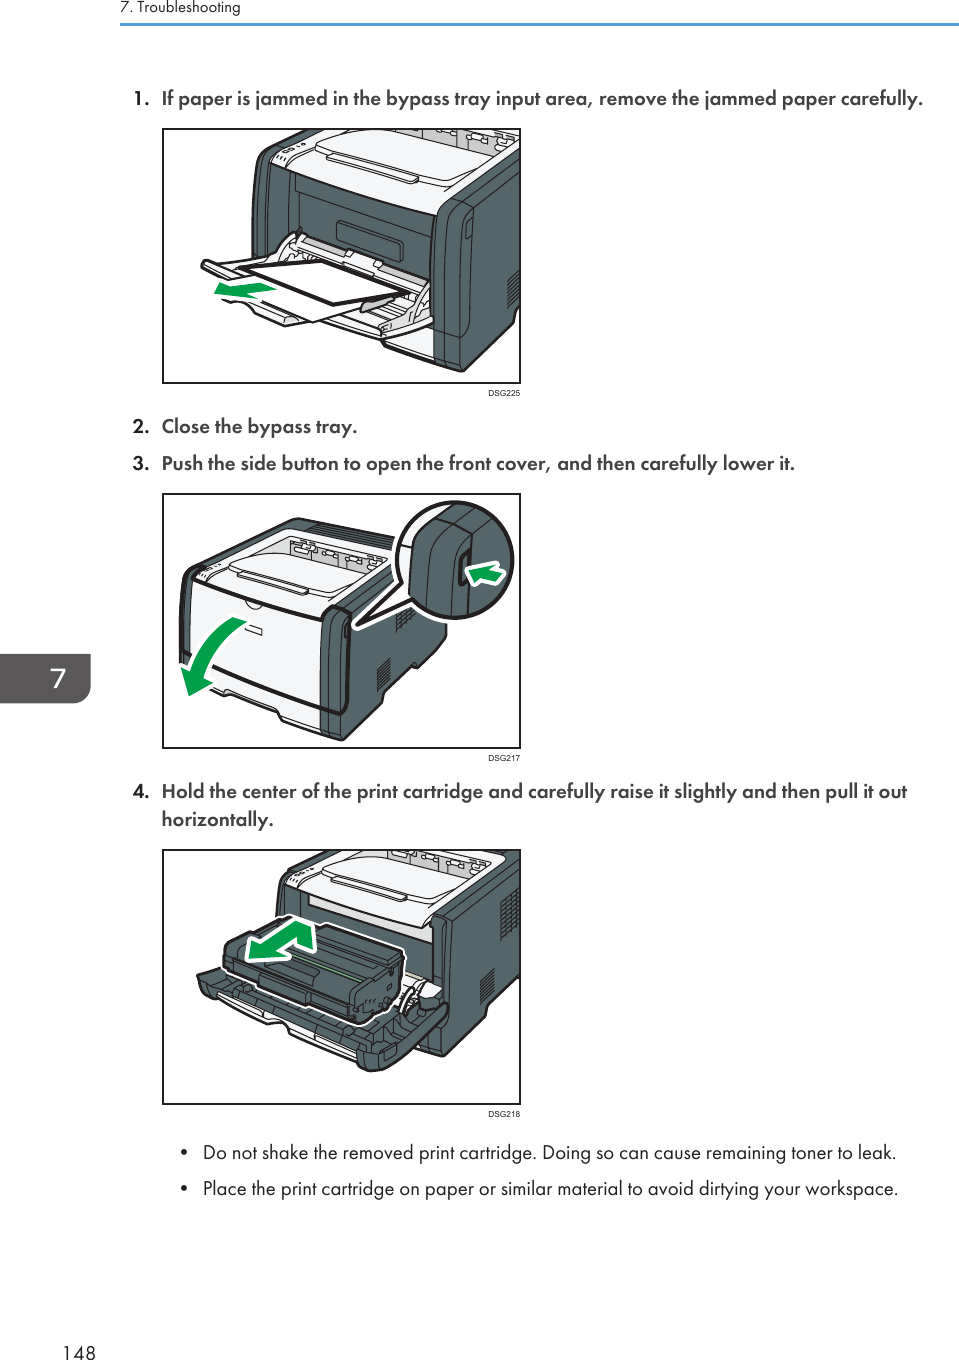 1. If paper is jammed in the bypass tray input area, remove the jammed paper carefully.DSG2252. Close the bypass tray.3. Push the side button to open the front cover, and then carefully lower it.DSG2174. Hold the center of the print cartridge and carefully raise it slightly and then pull it outhorizontally.DSG218• Do not shake the removed print cartridge. Doing so can cause remaining toner to leak.• Place the print cartridge on paper or similar material to avoid dirtying your workspace.7. Troubleshooting148